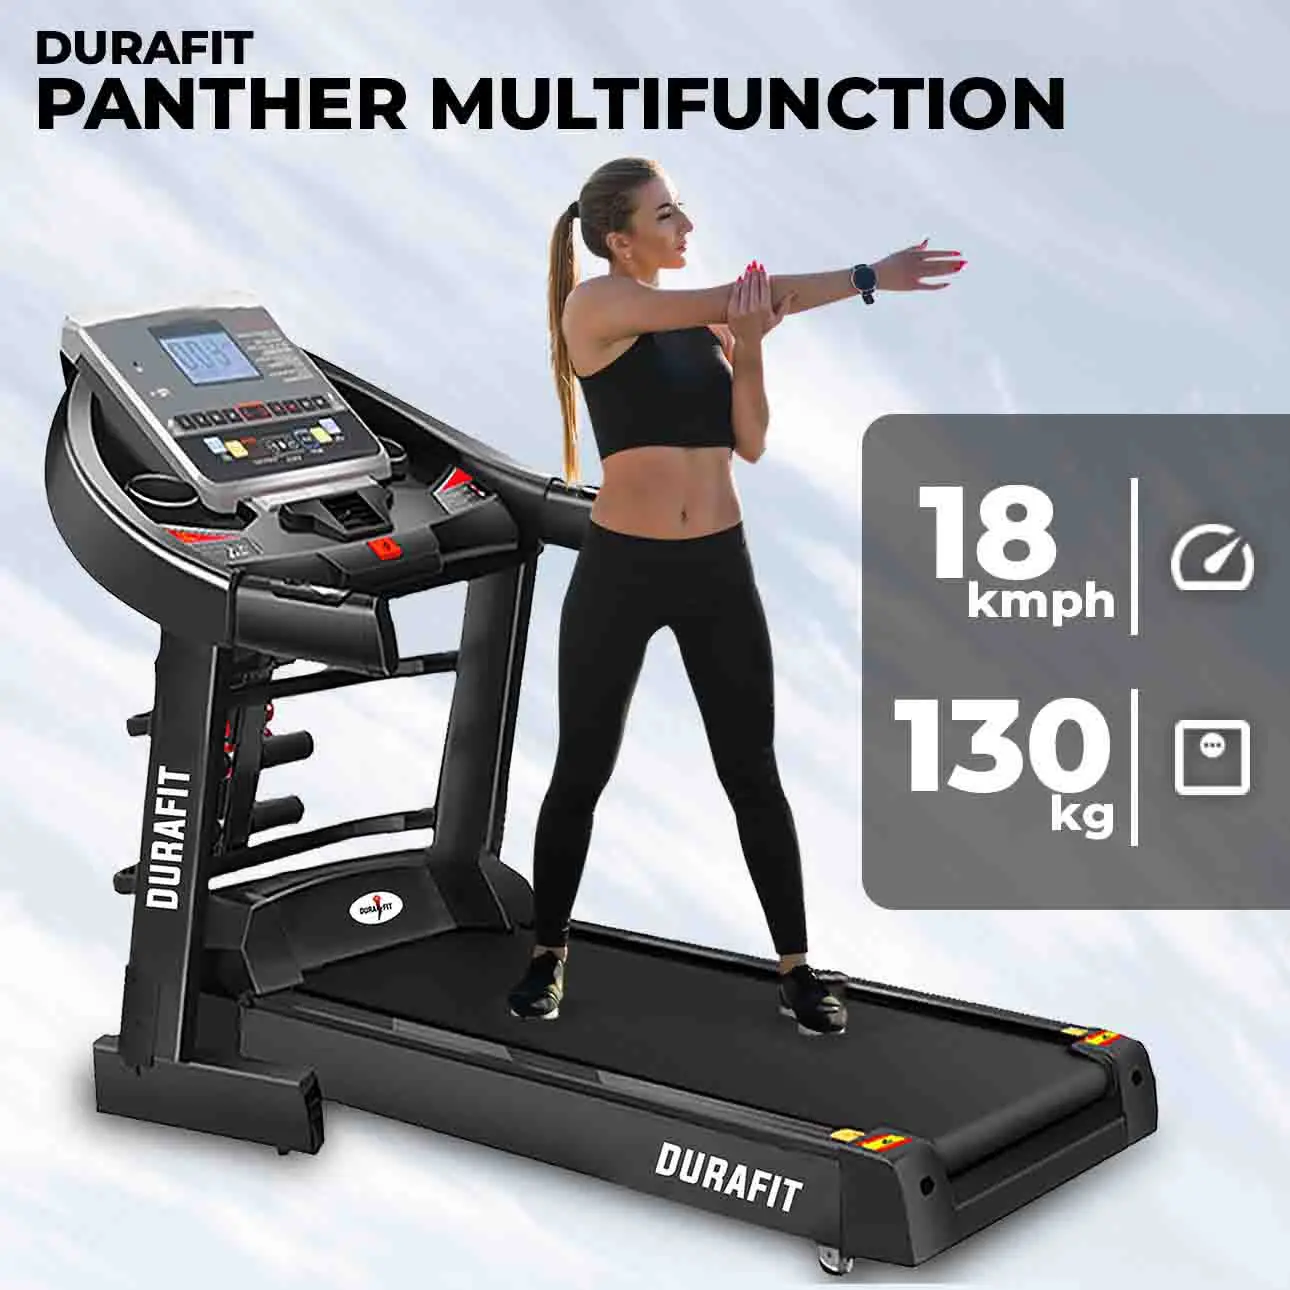 Durafit Panther Multifunction Treadmill with 130kg Max User weight